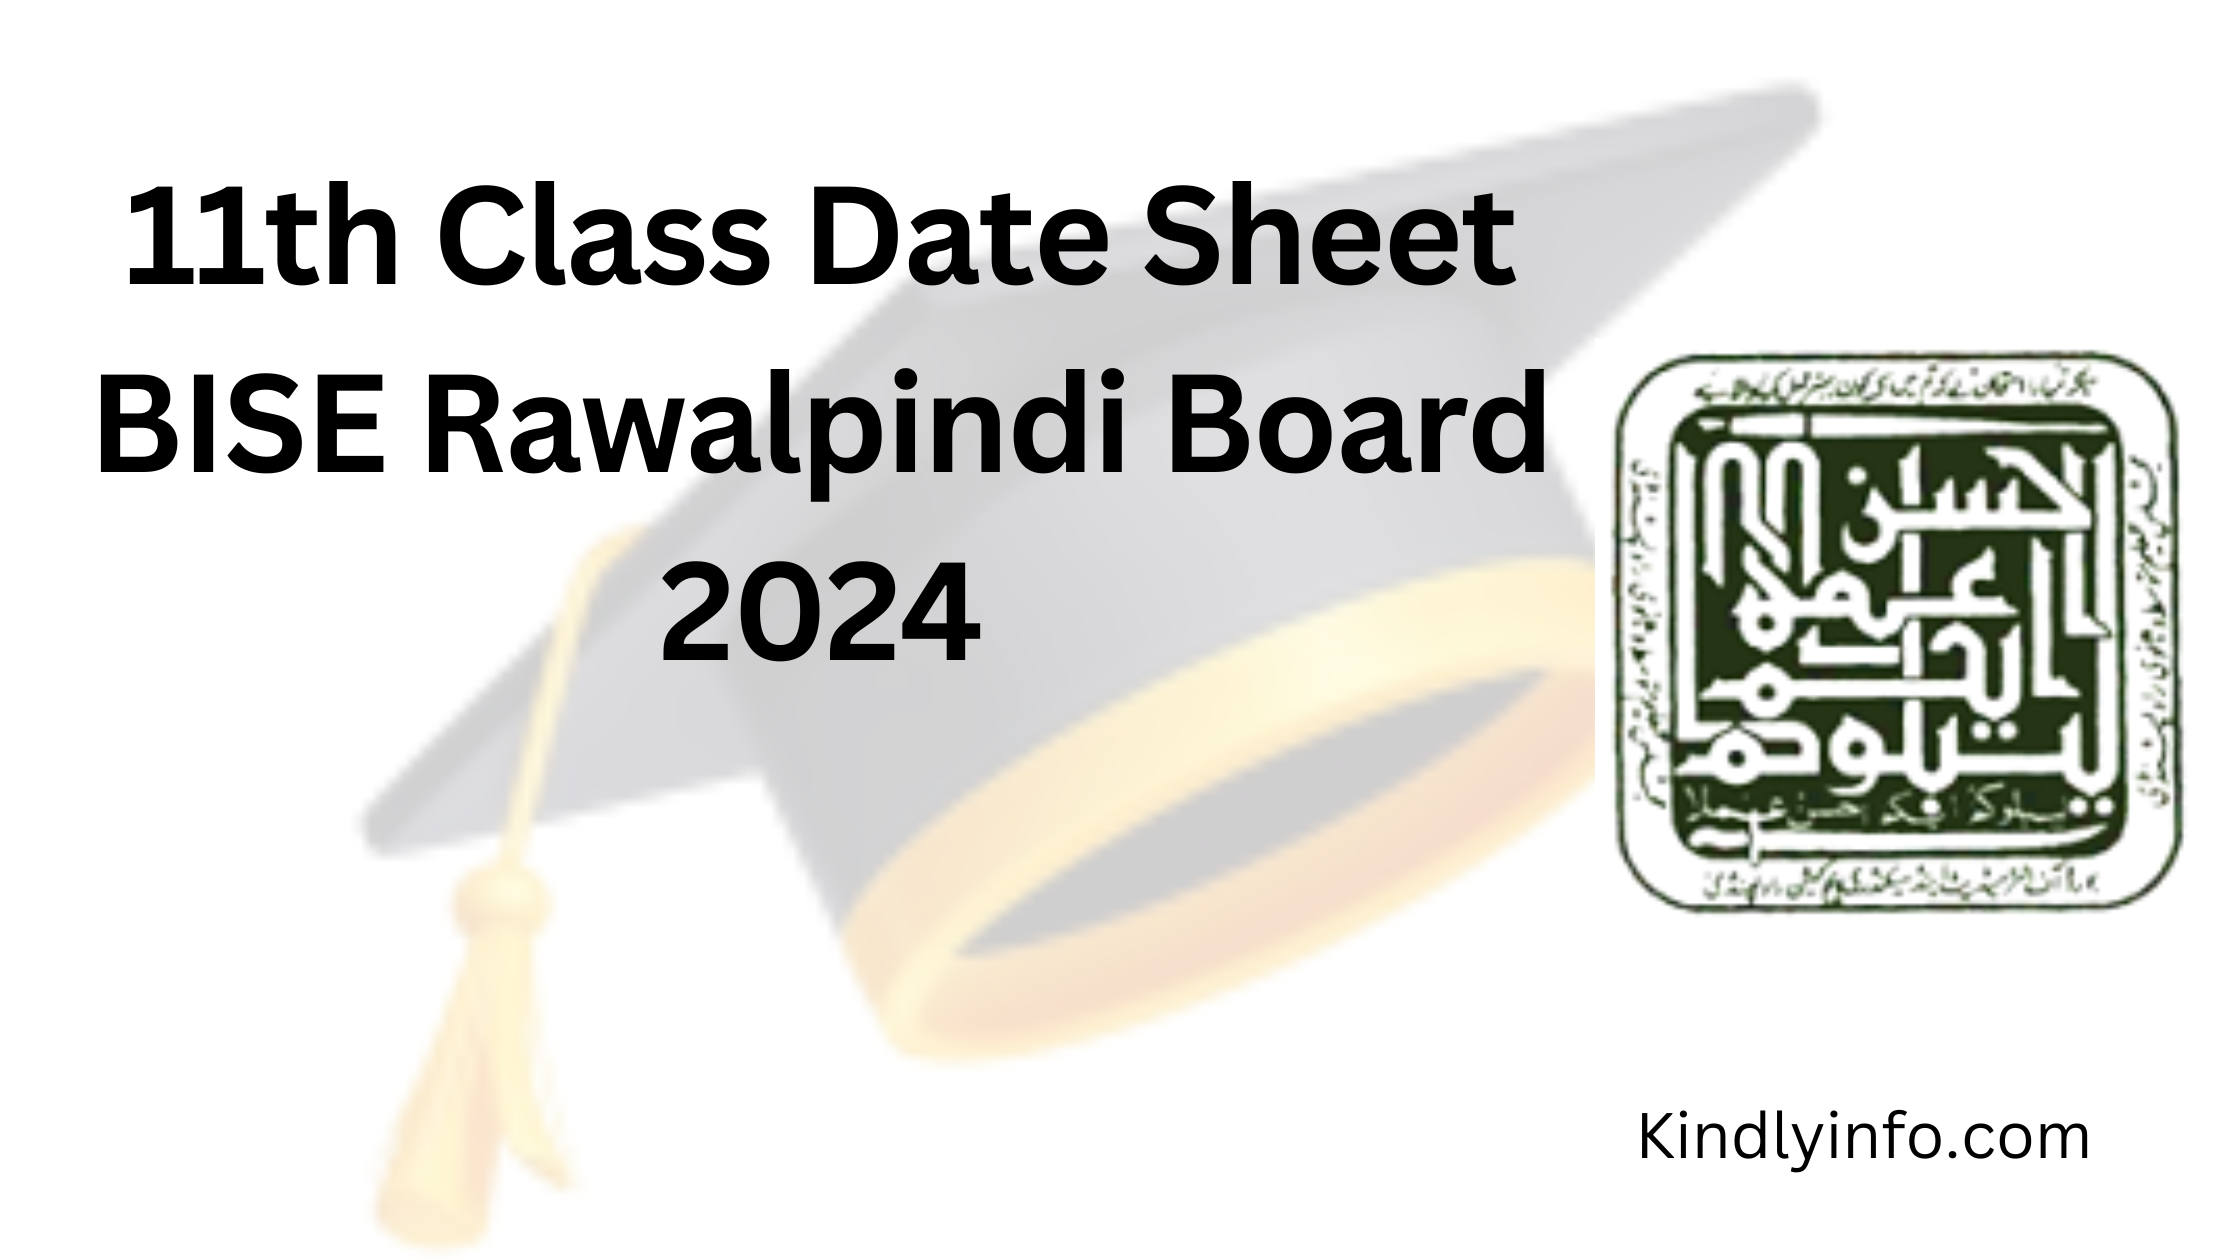 11th Class 1st Year Date Sheet 2024 BISE Rawalpindi Board. The class 11th date sheet will be released in May 2024.